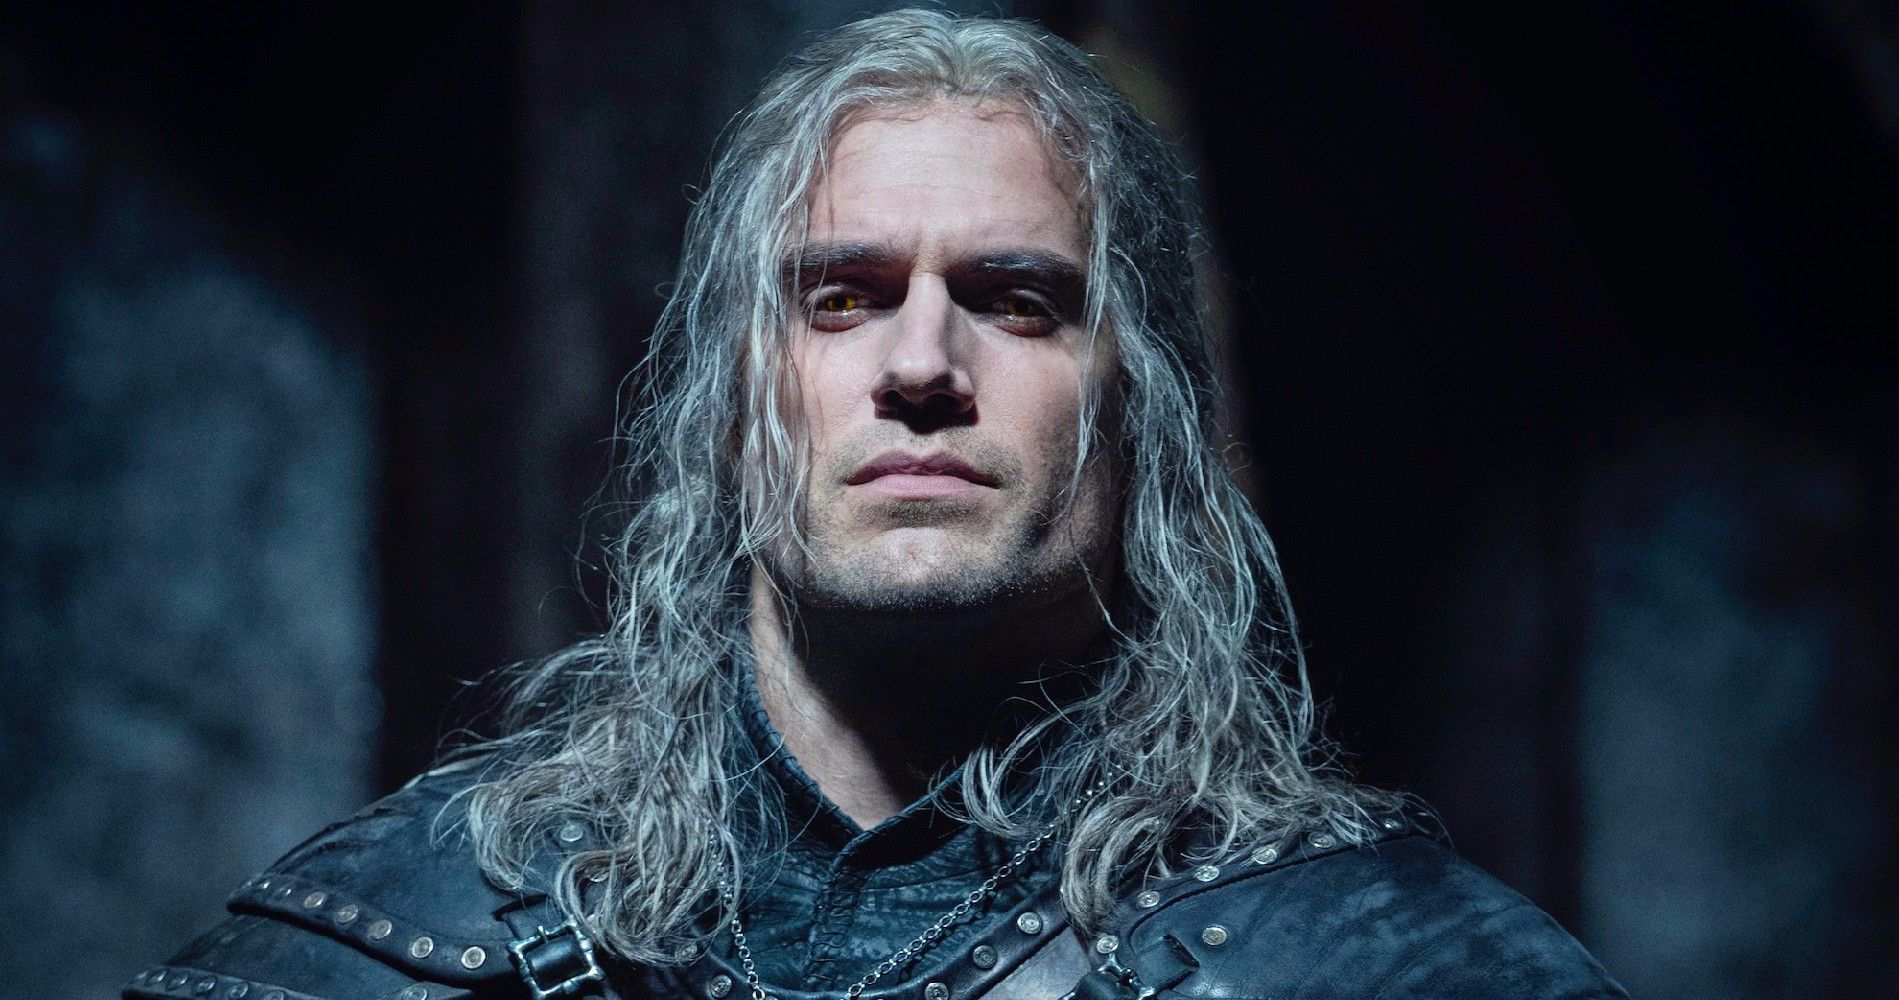 The Witcher Season 2 Halts Production After Crew Members Test Positive for Coronavirus